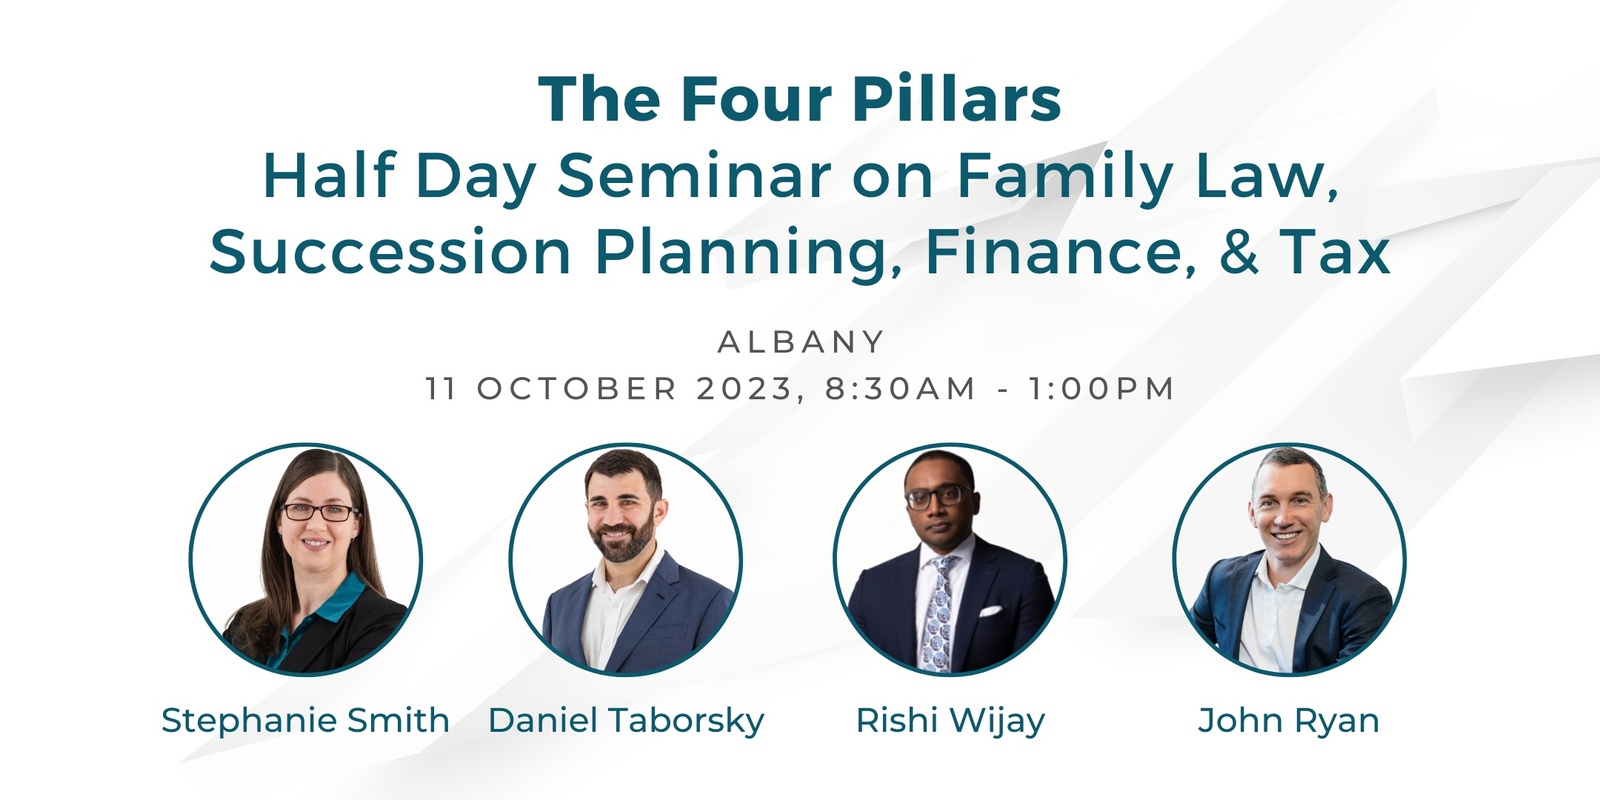 Banner image for The Four Pillars | Albany | Half Day Seminar on Family Law, Succession Planning, Finance & Tax